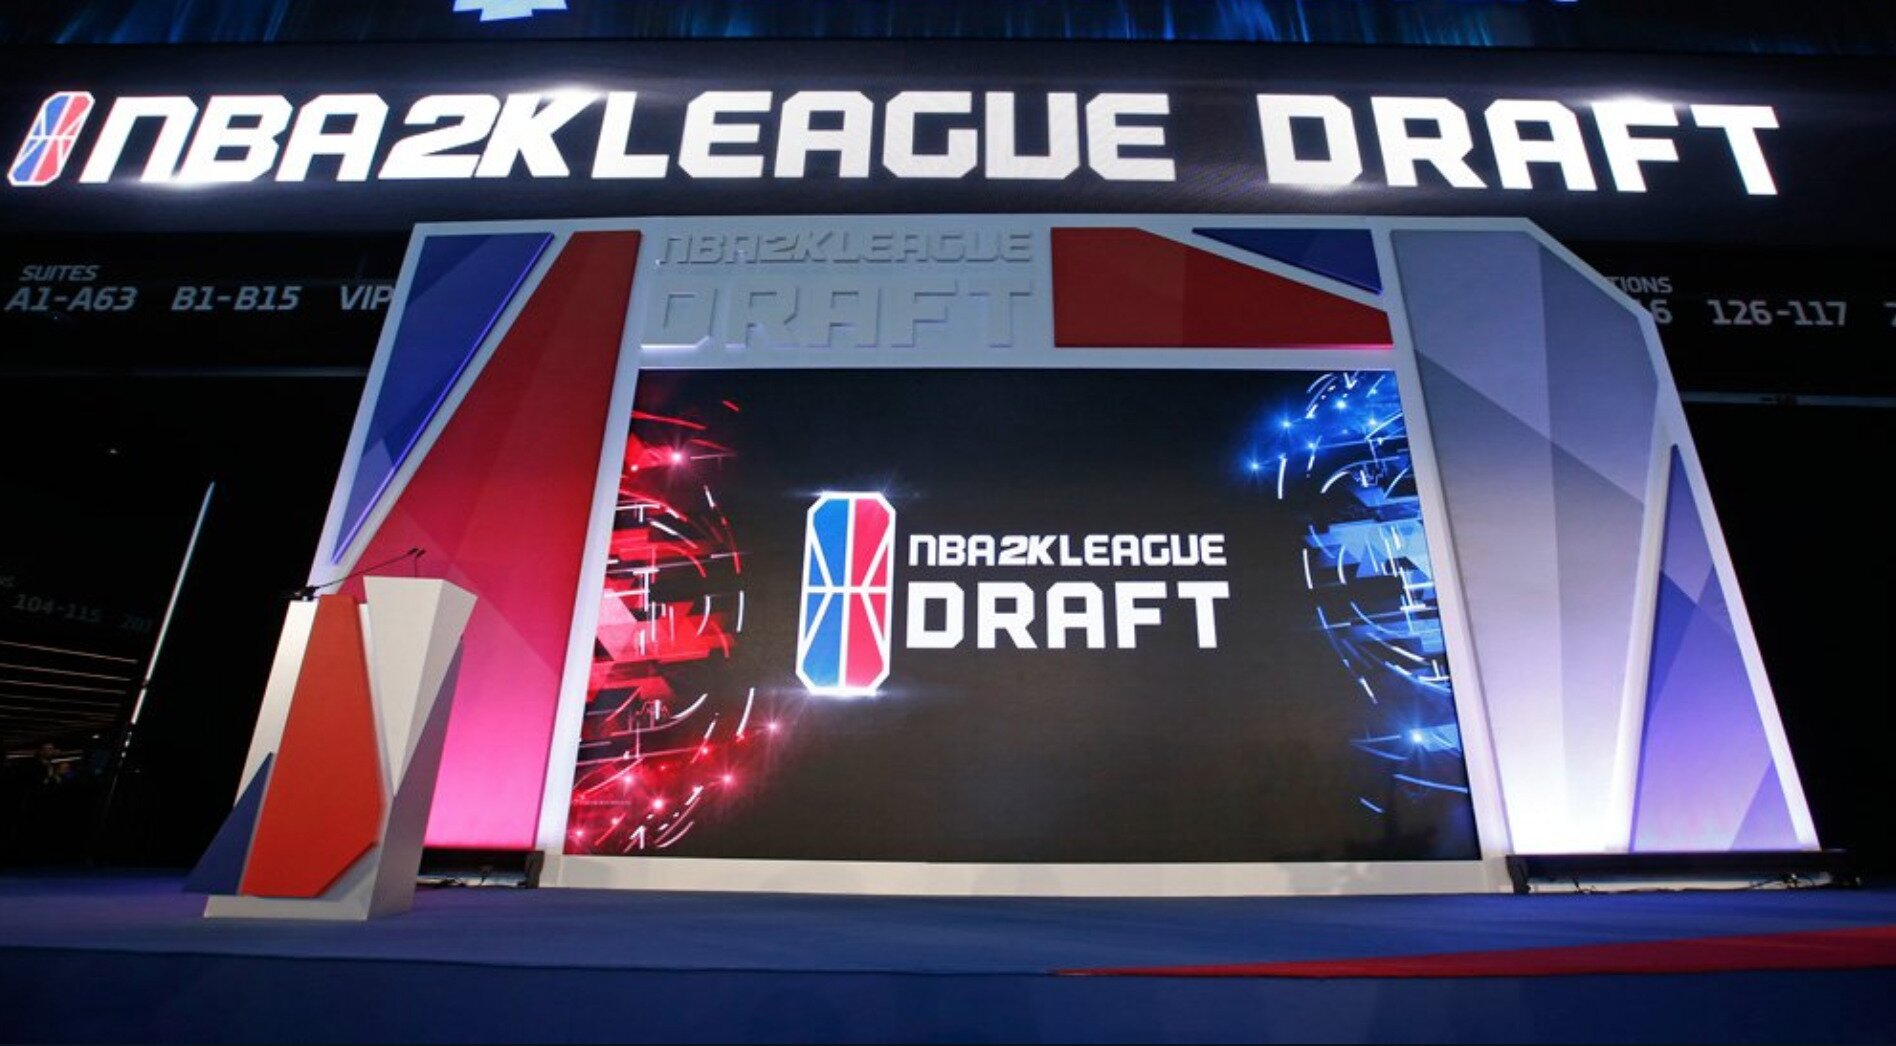 The 2019 NBA 2K League draft saw 75 players picked by the 21 franchises, rounding out their rosters ahead of the April 2 start date. 